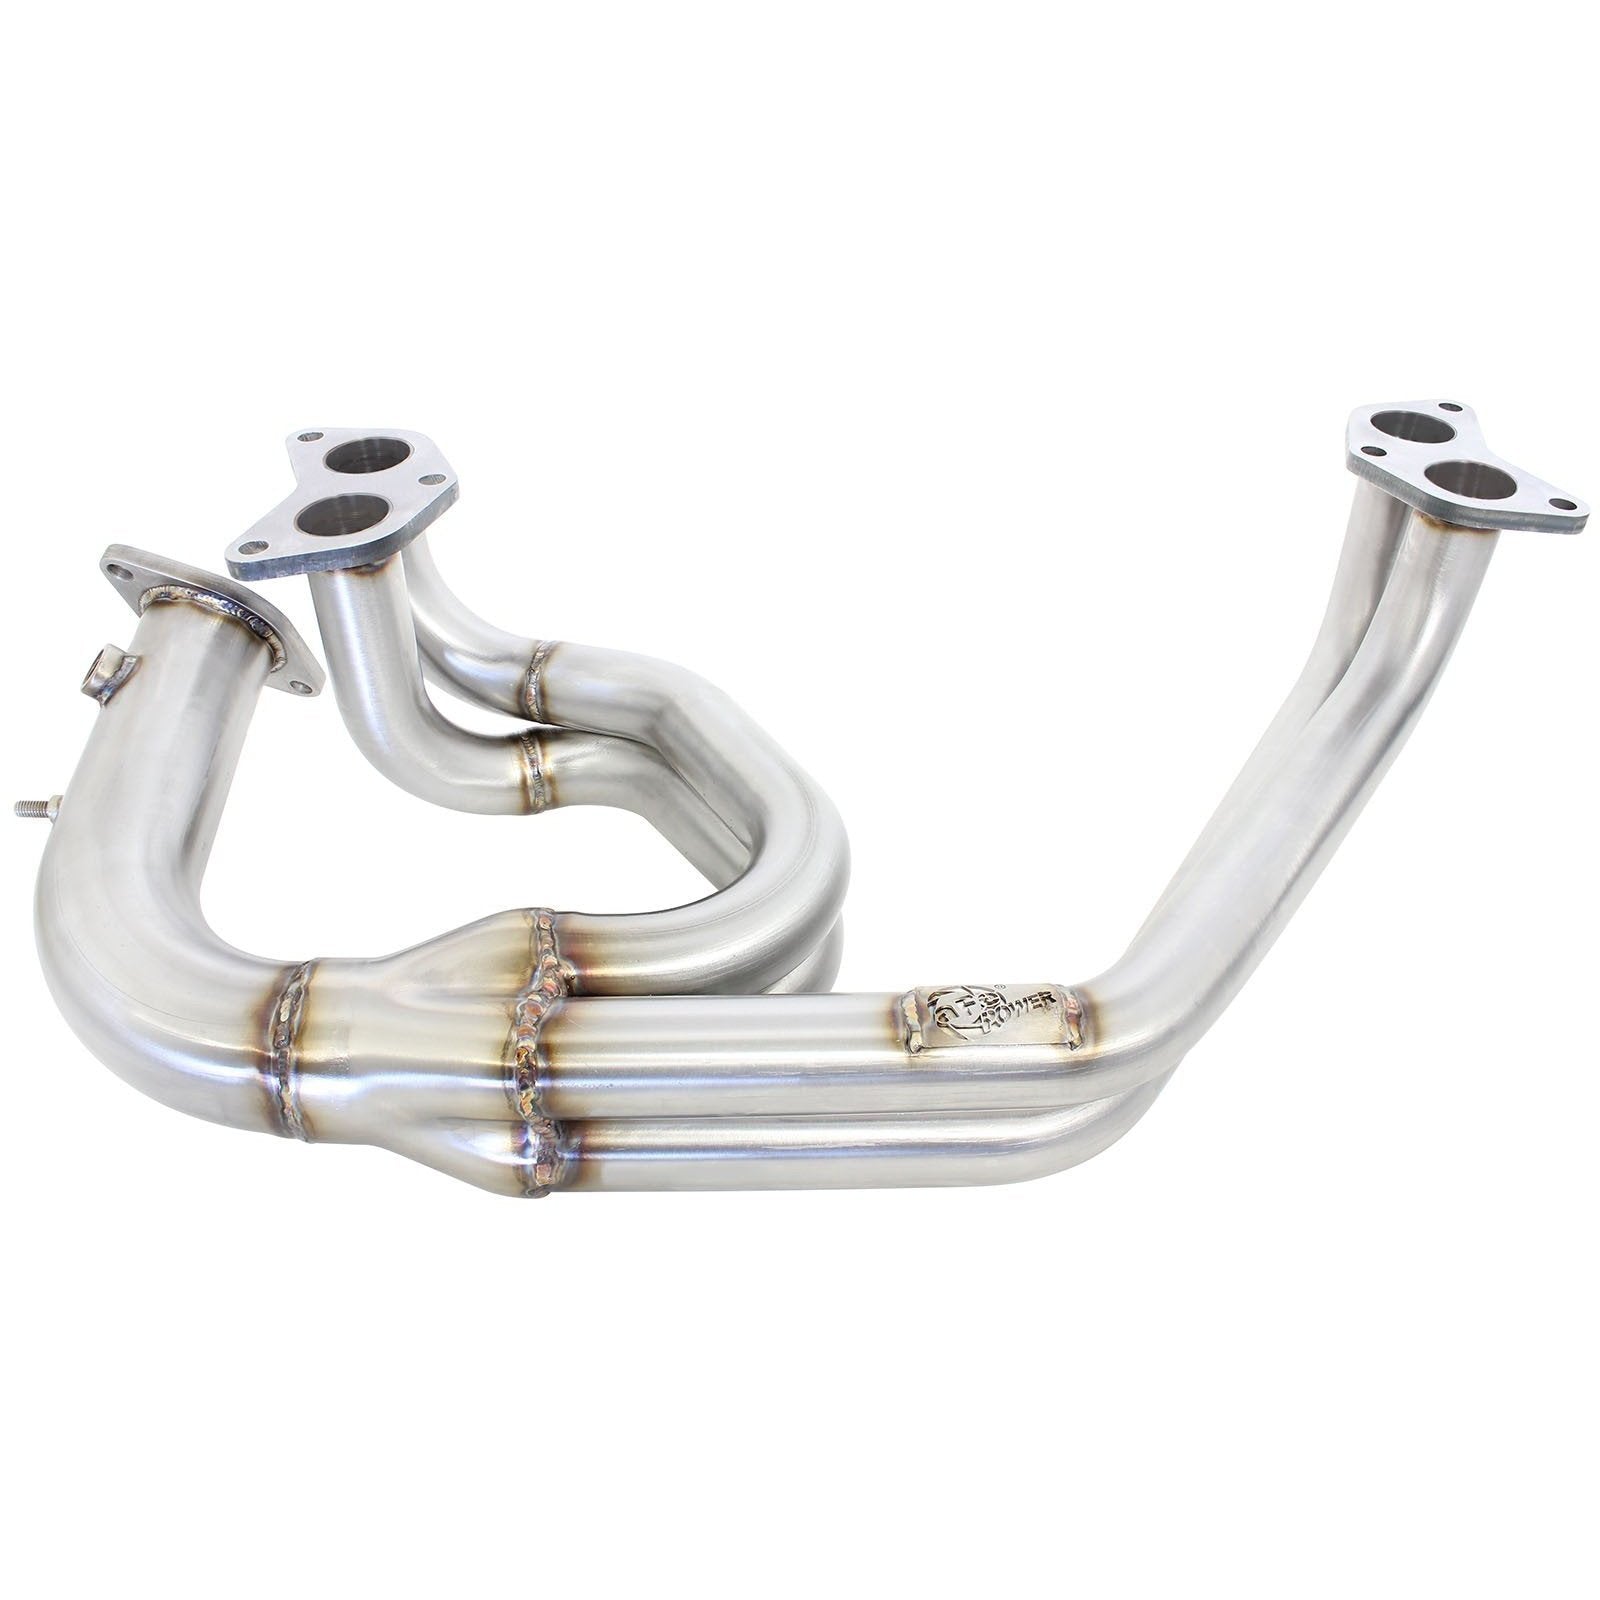 aFe Twisted Steel Header Subaru STI 2004-2019 / WRX 2002-2014 (48-36802)-afe48-36802-48-36802-Exhaust Headers and Manifolds-aFe-JDMuscle